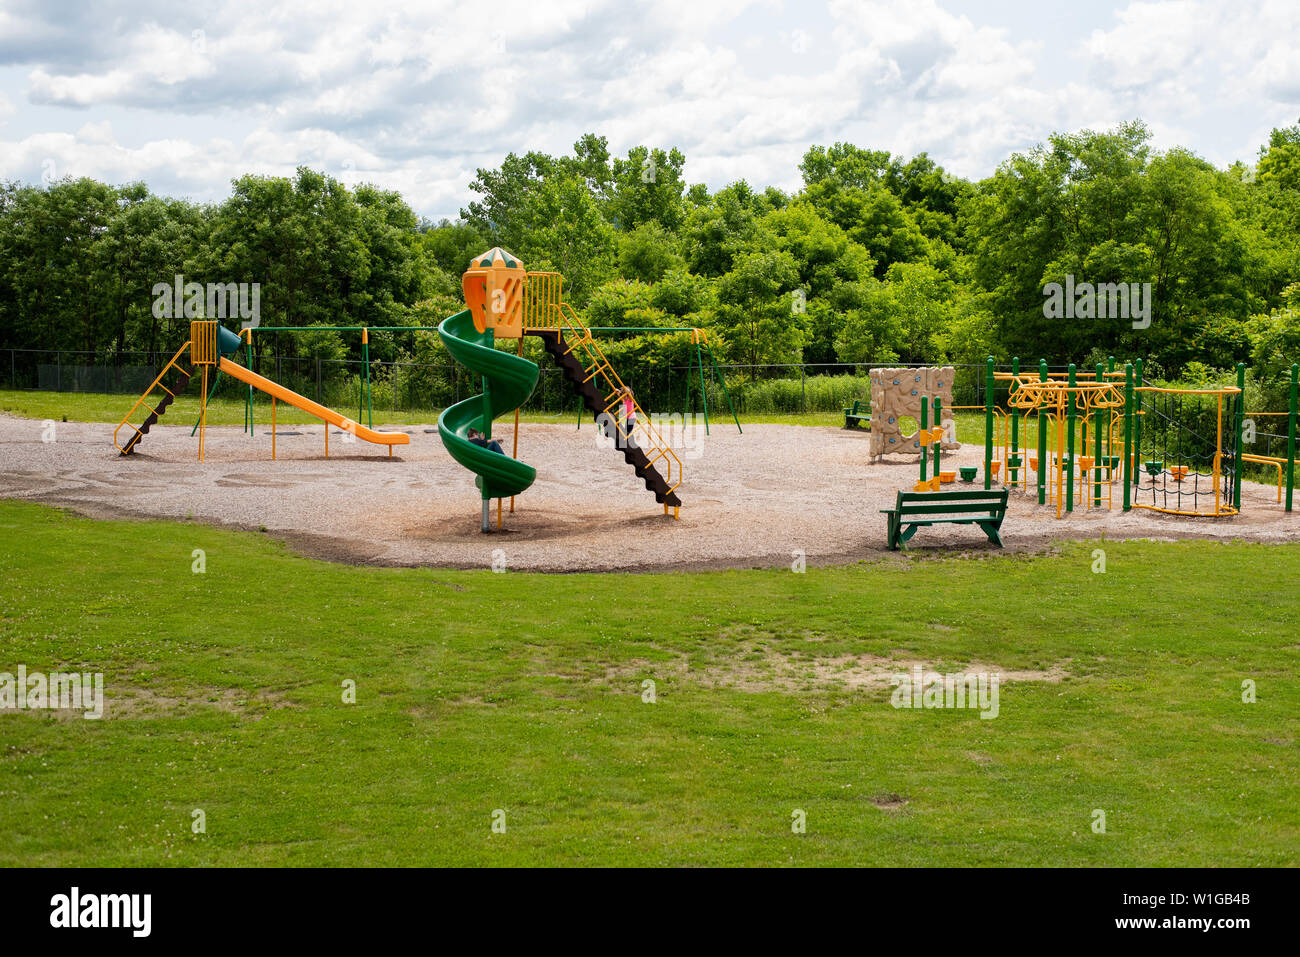 Children playing on playground equipment on a summer day. Stock Photo